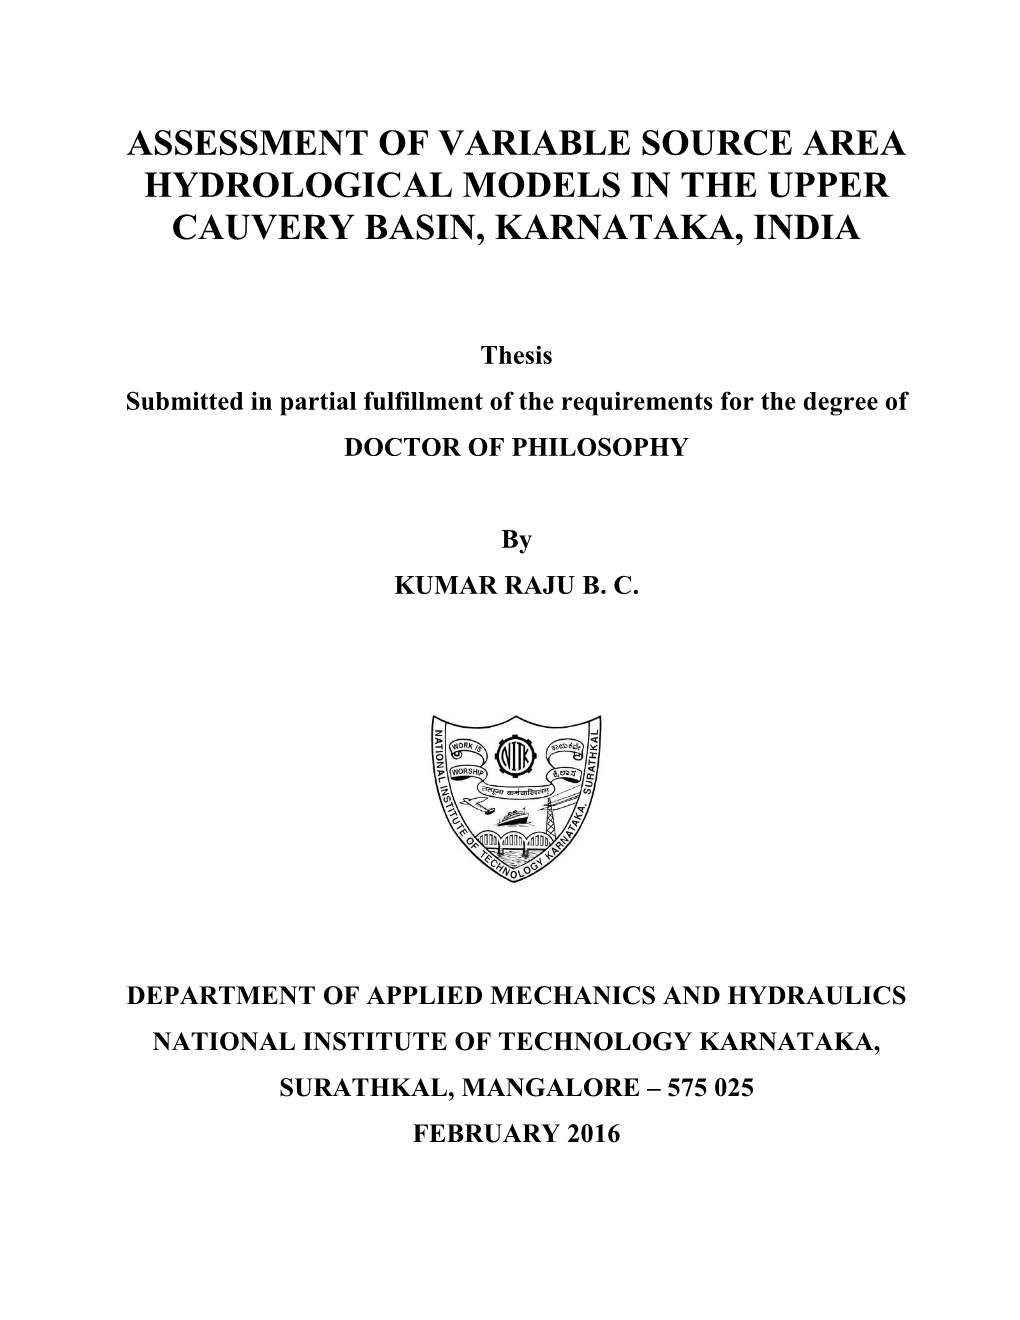 Assessment of Variable Source Area Hydrological Models in the Upper Cauvery Basin, Karnataka, India